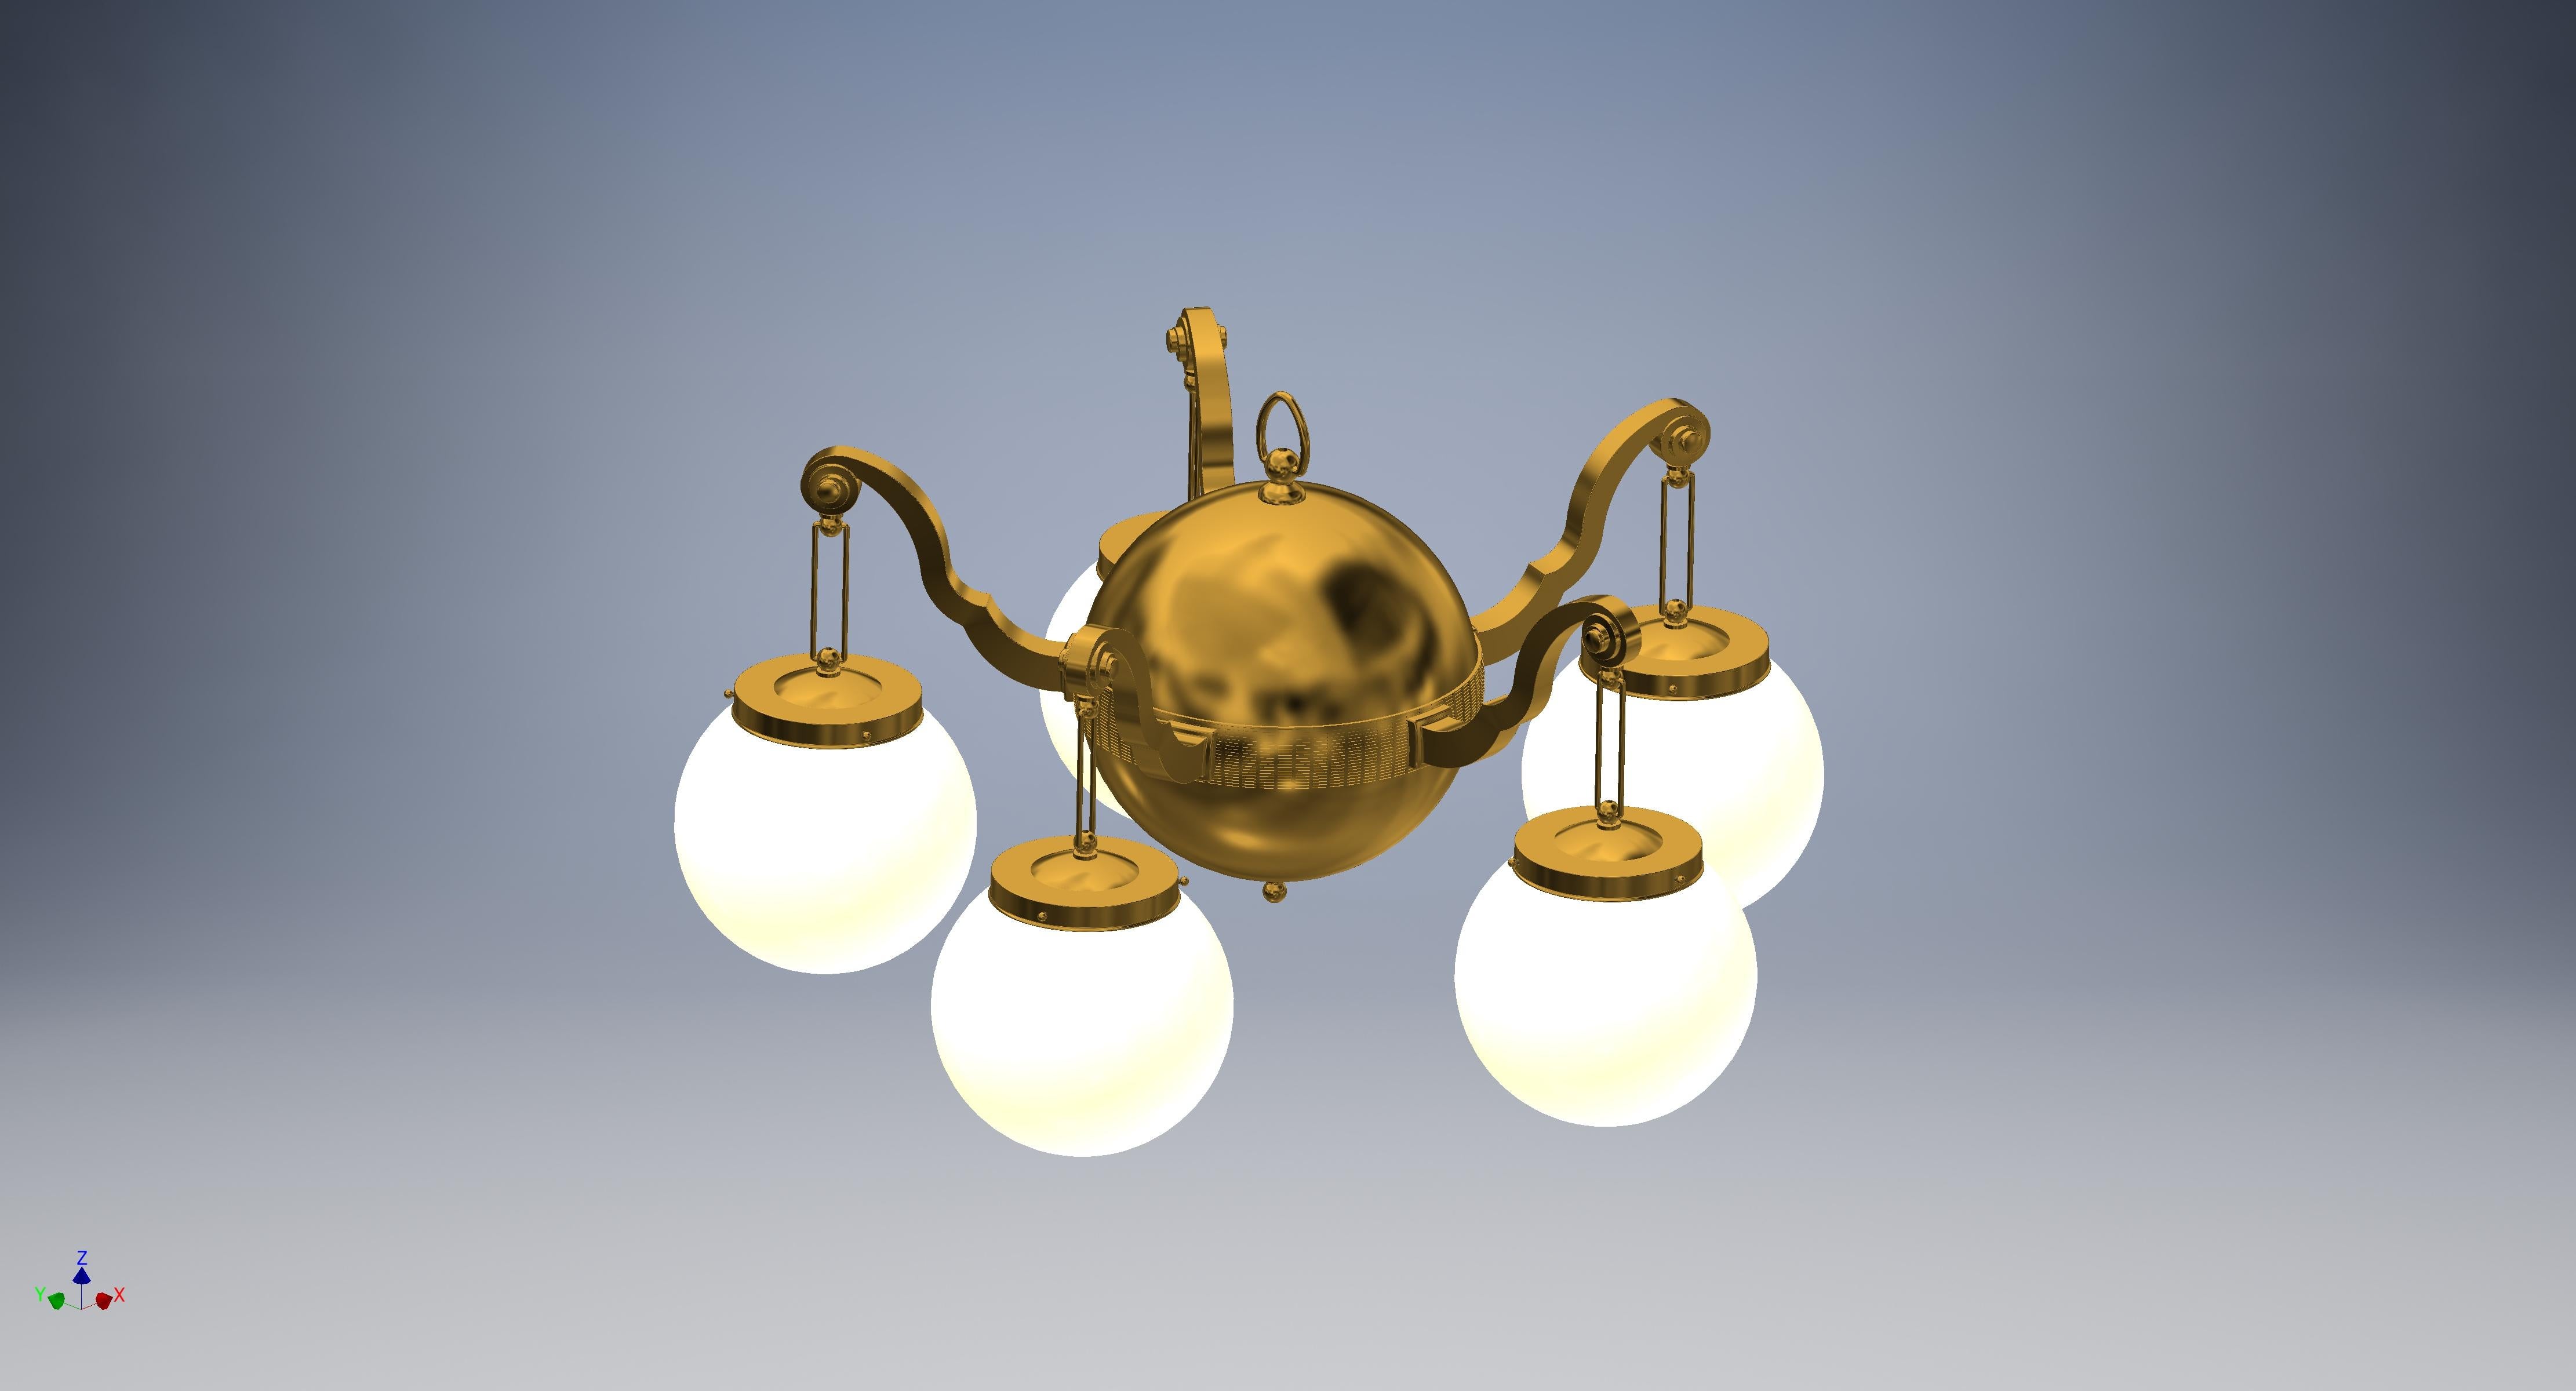 Chandelier with a ball-corpus five-flames with handblown opaline shades, baroque-style arms which reflects the need for ornaments in this period, also in a larger version

Most components according to the UL regulations, with an additional charge we